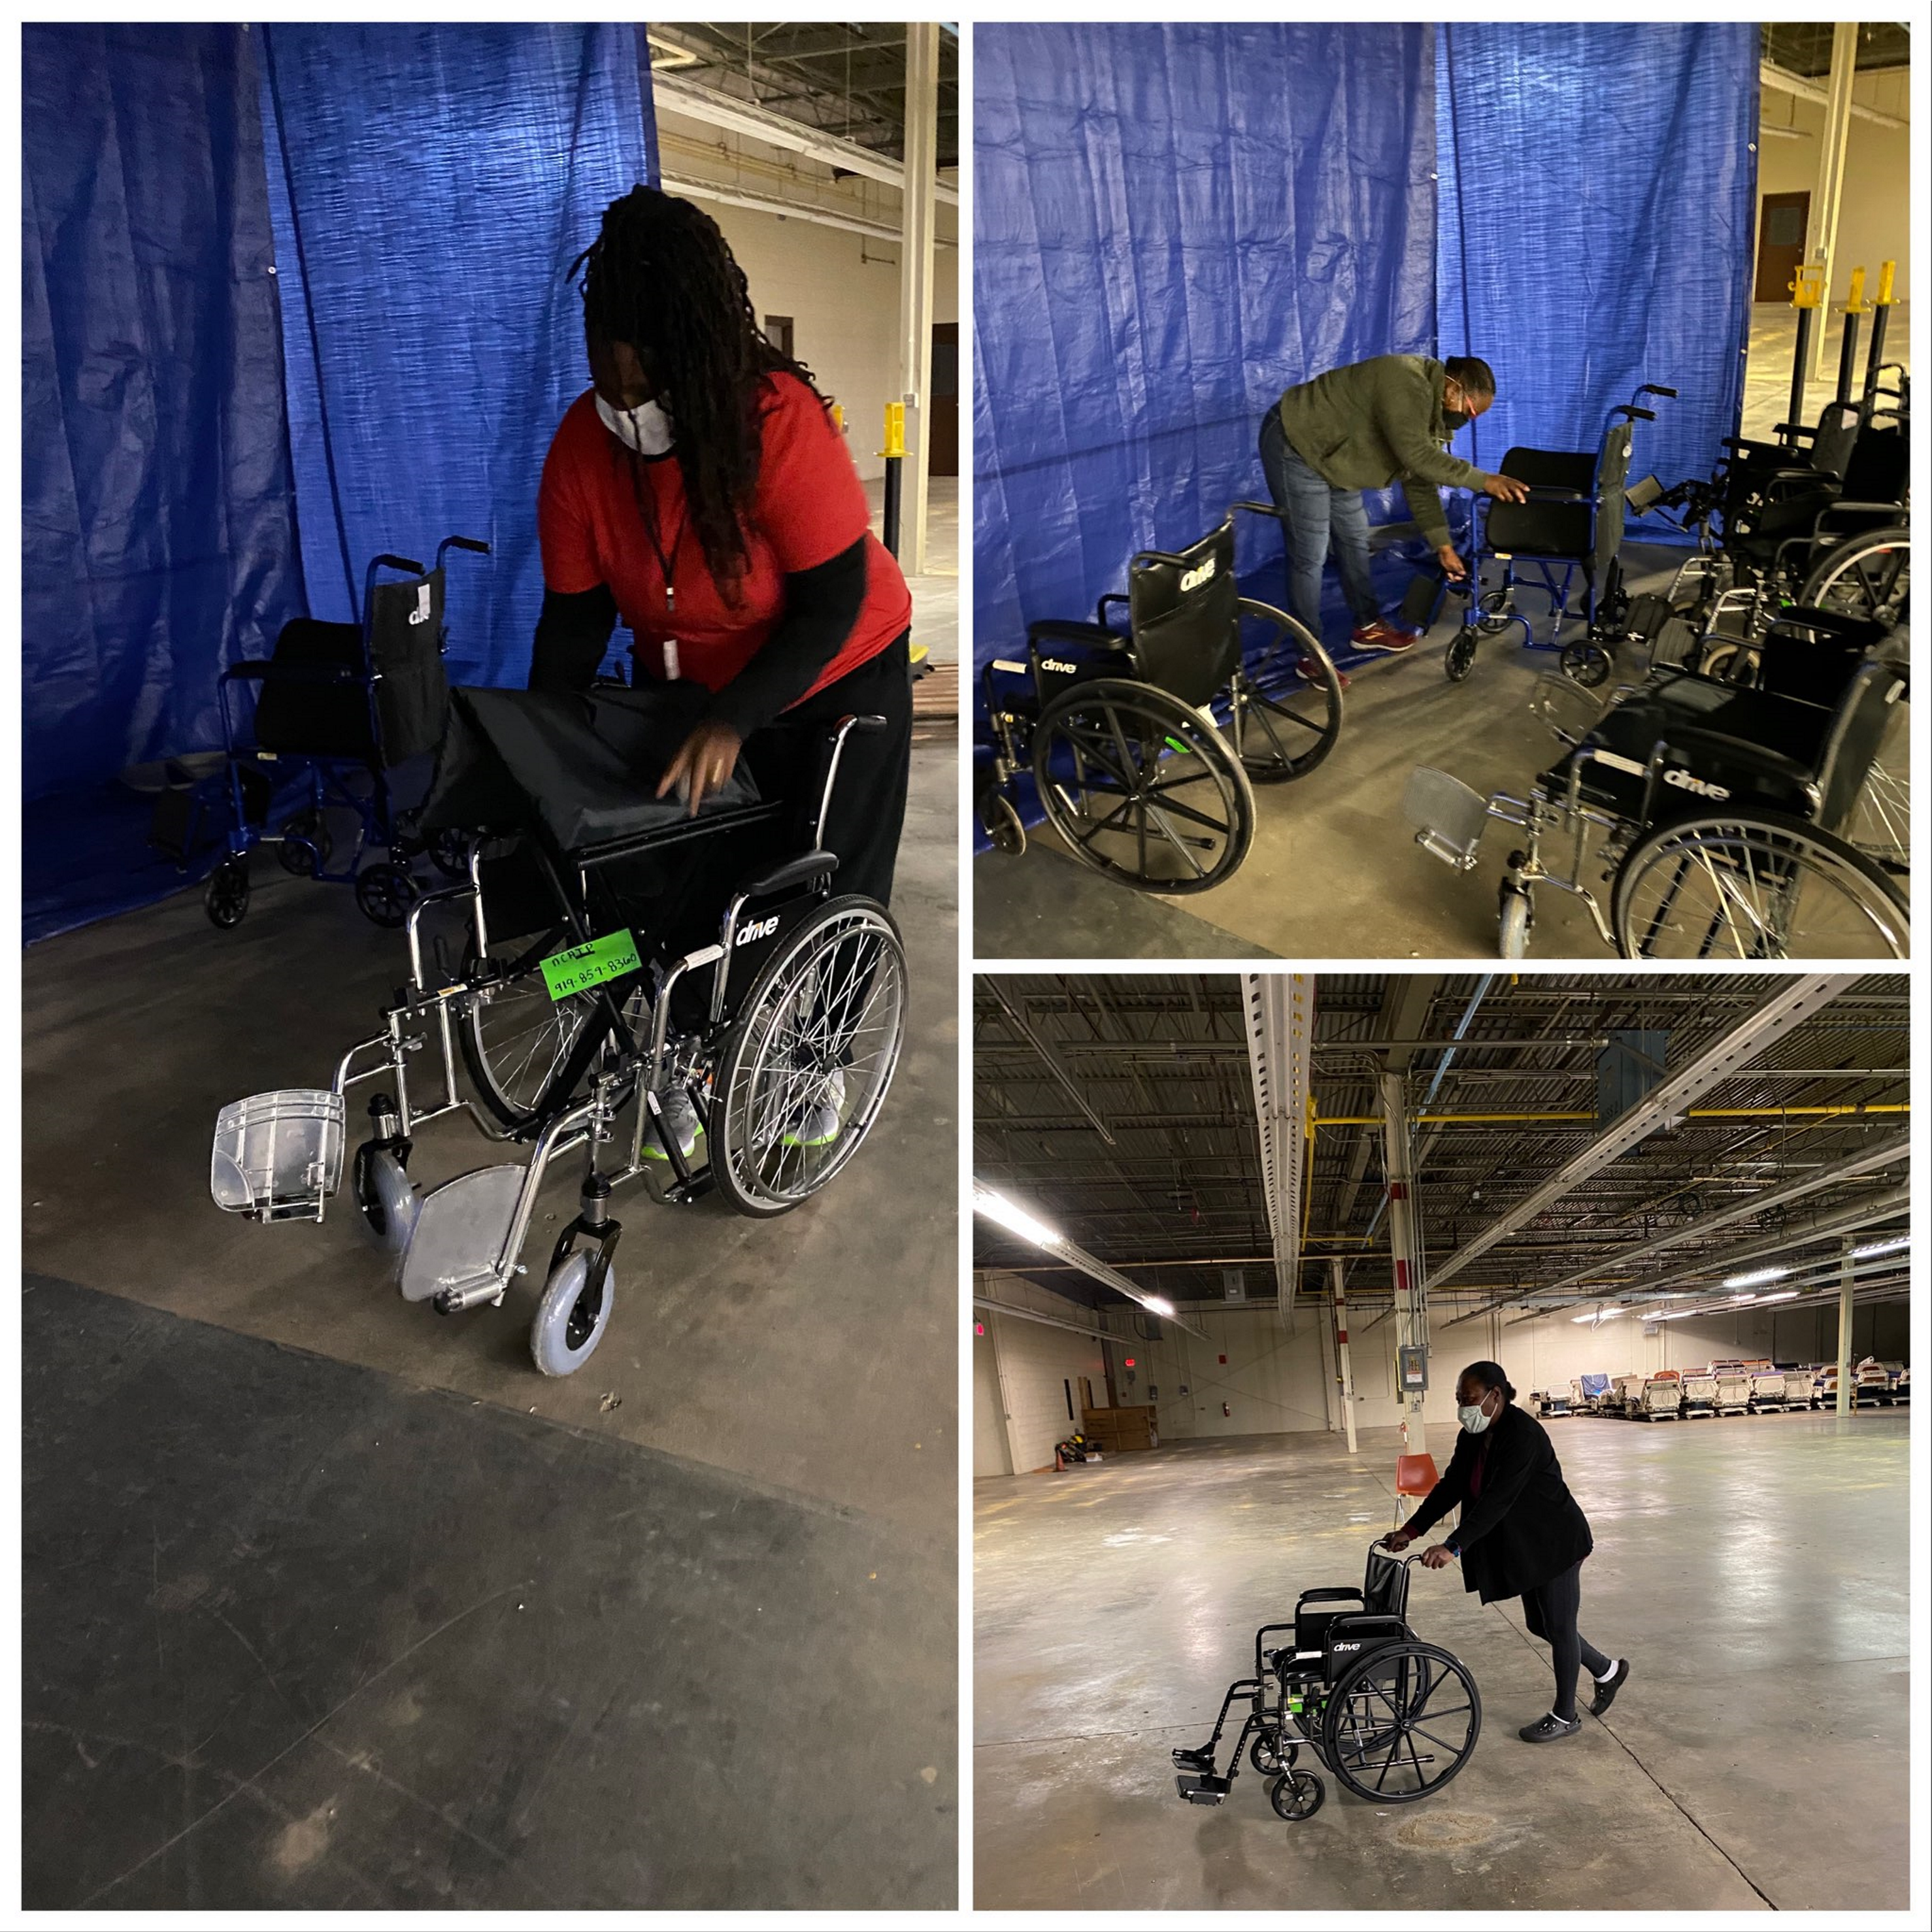 Three images of manual wheelchairs being delivered and set up in a large warehouse environment by Black women wearing masks.